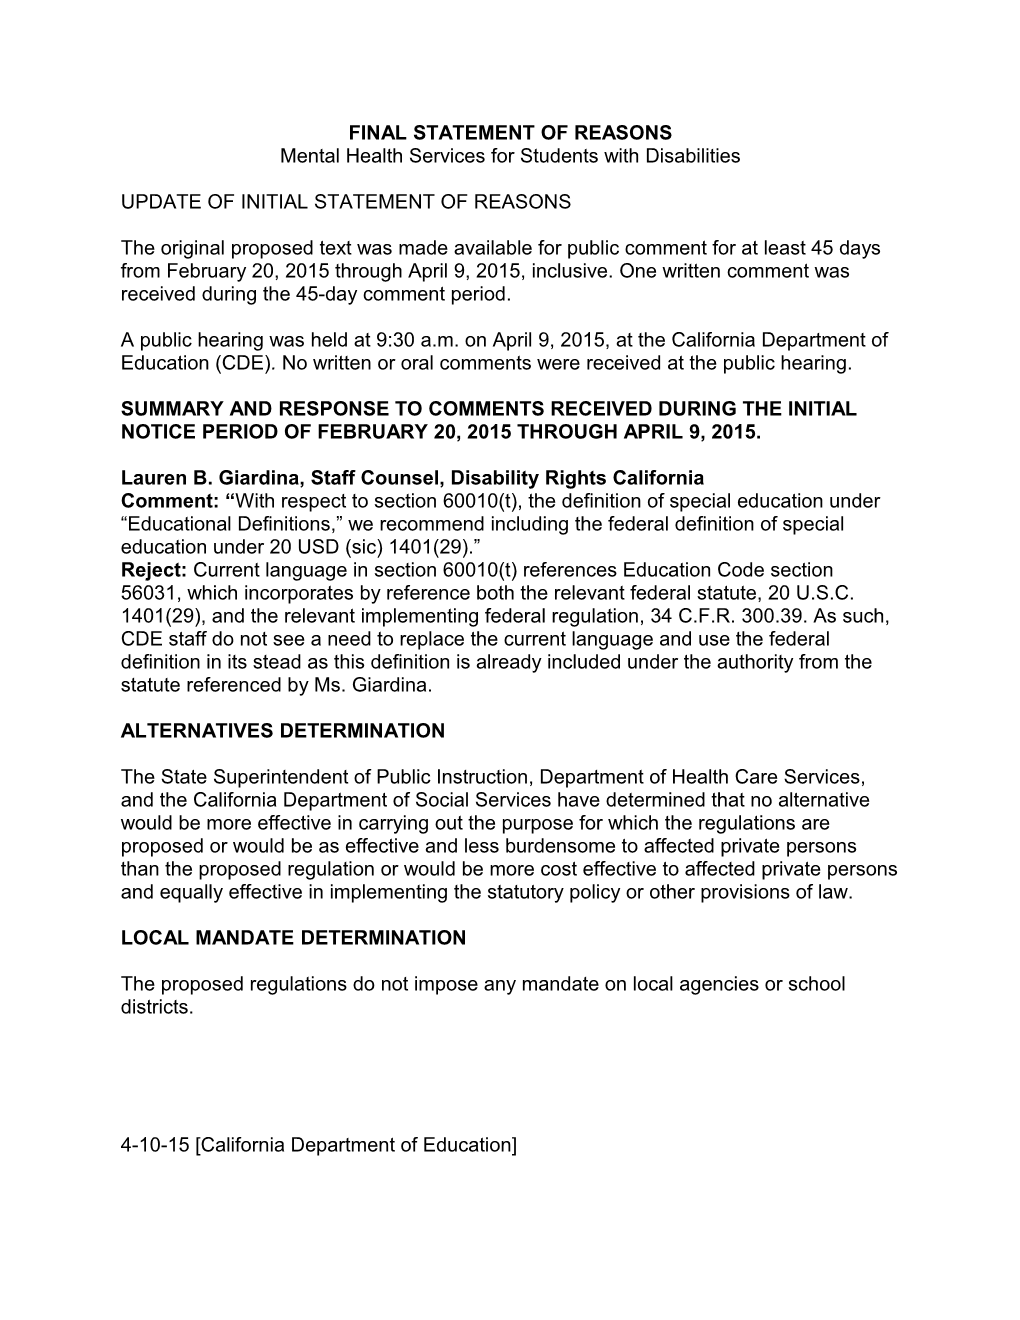 AB 114 T2 FSR - Laws and Regulations (CA Dept of Education)